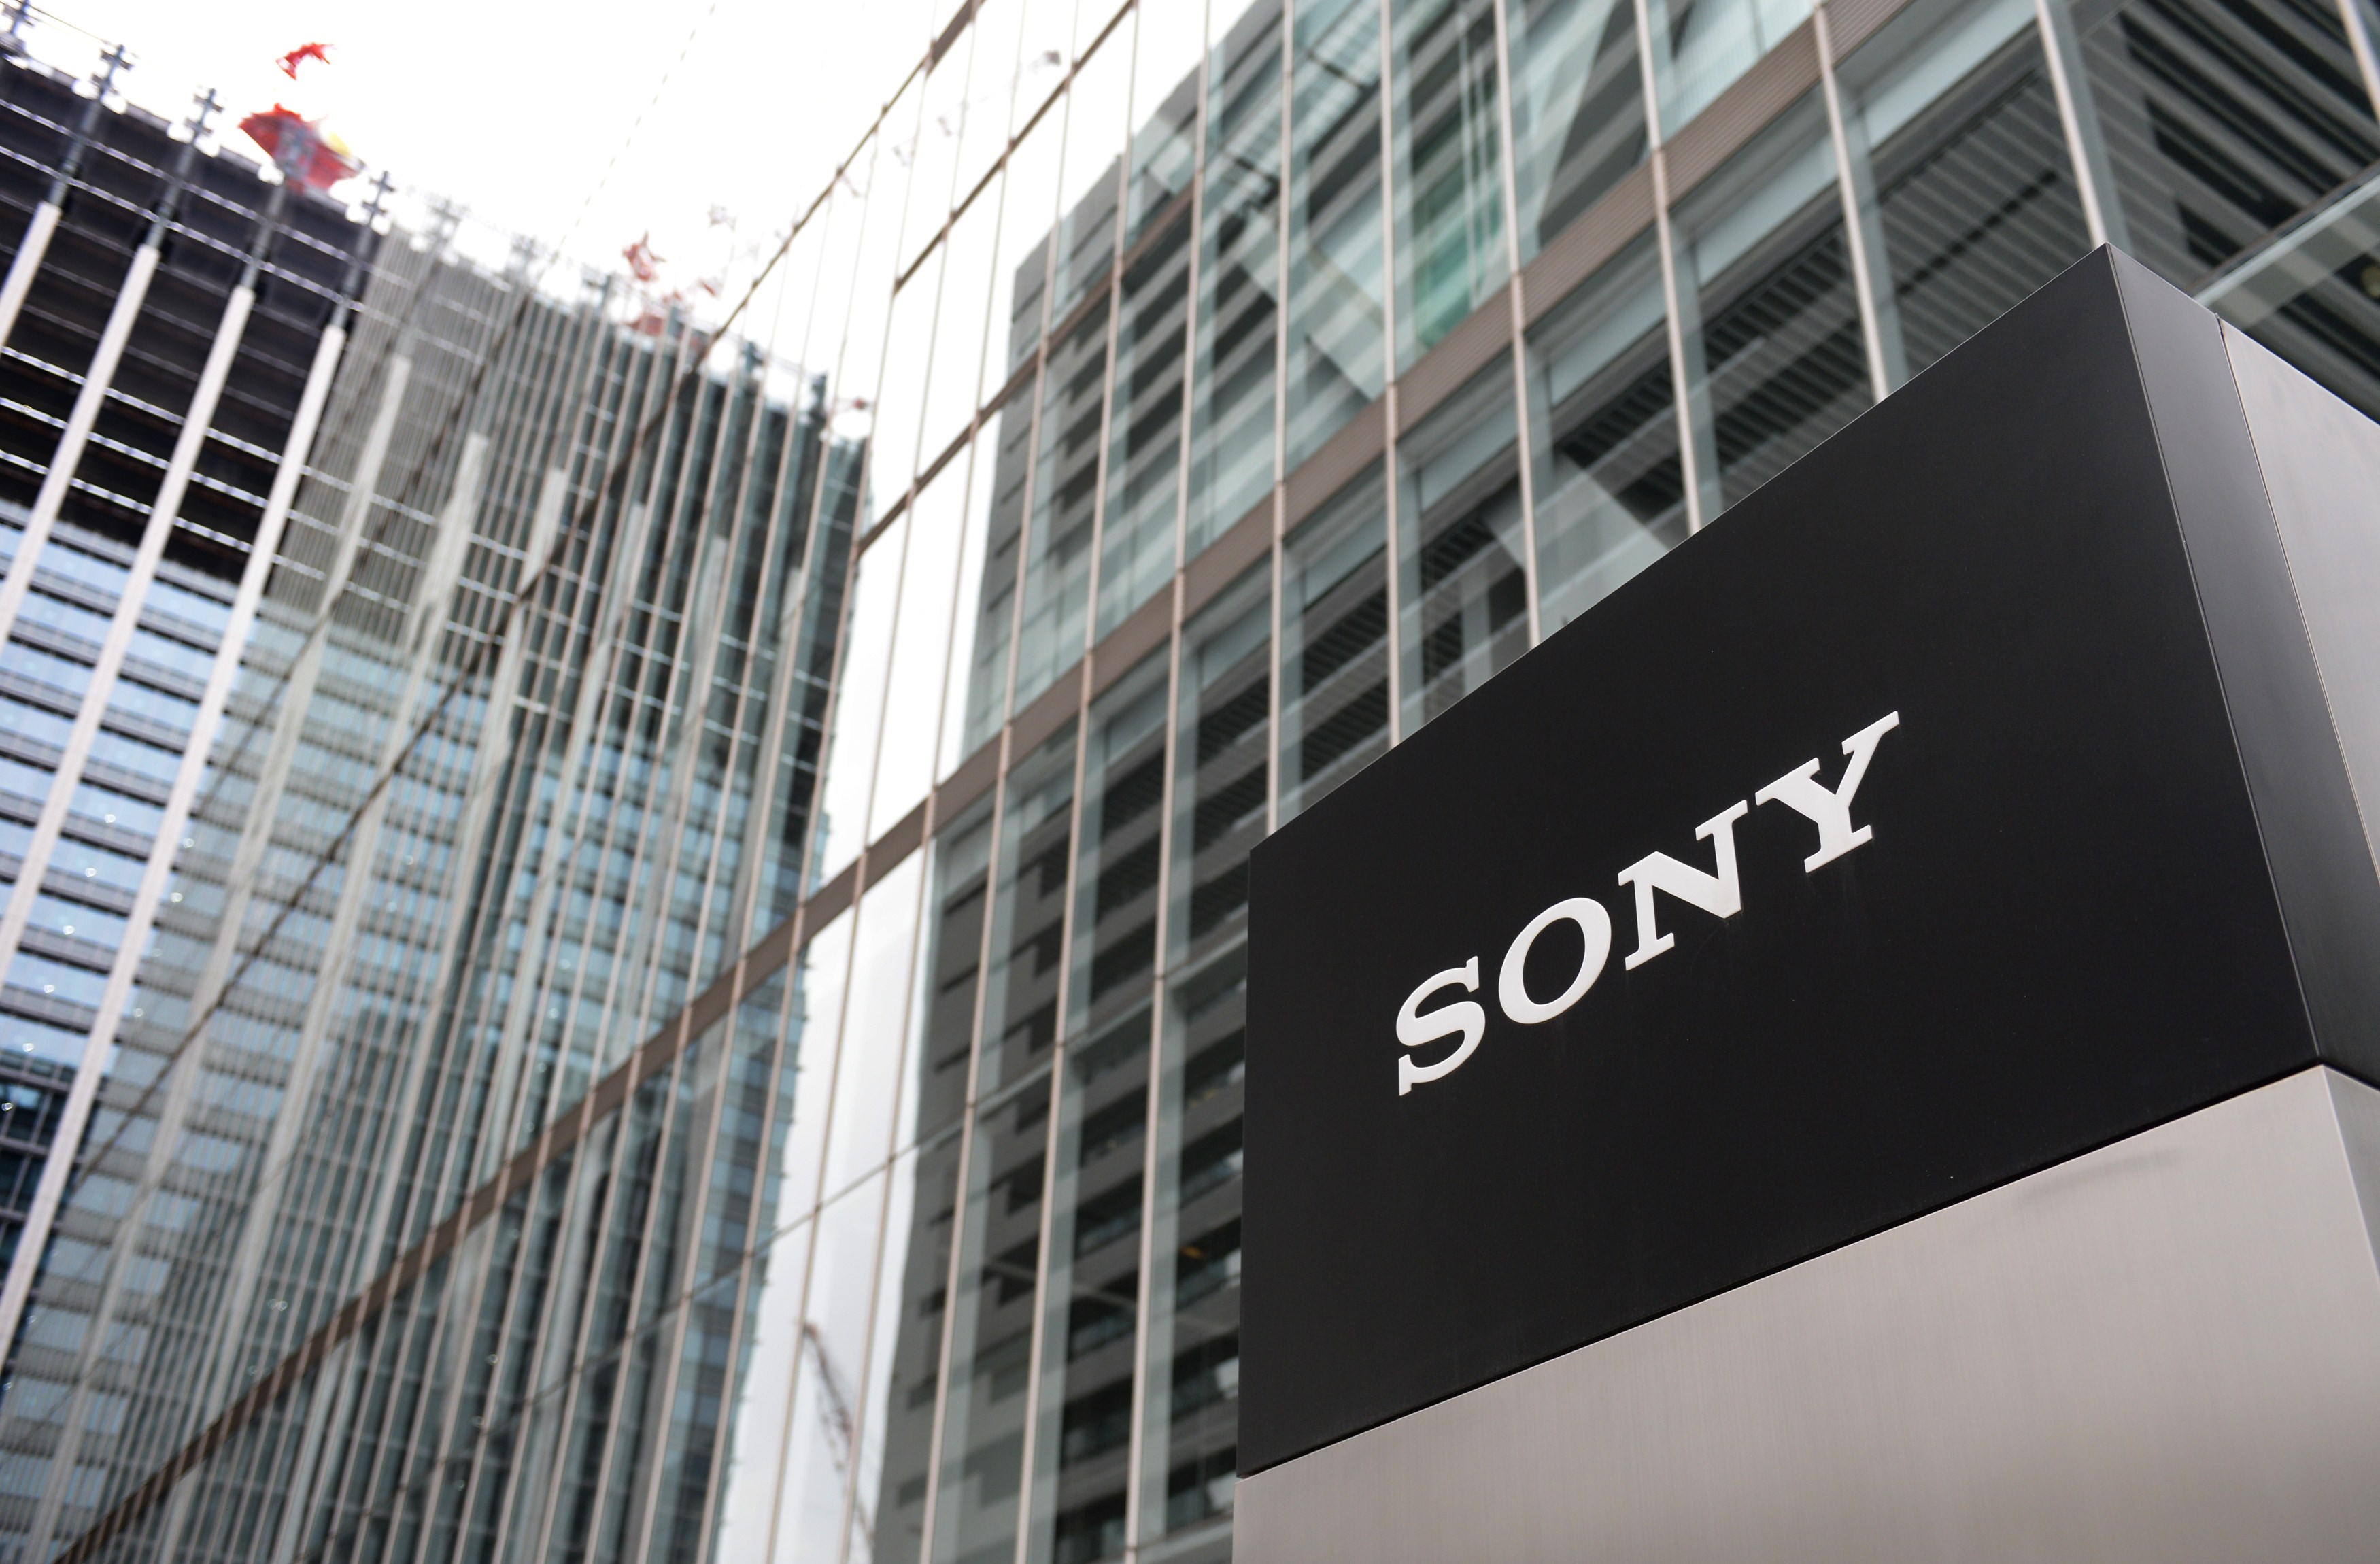 A logo of Japan's Sony Corporation is displayed at its headquarters in Tokyo on May 14, 2014. (Kazuhiro Nogi—AFP/Getty Images)